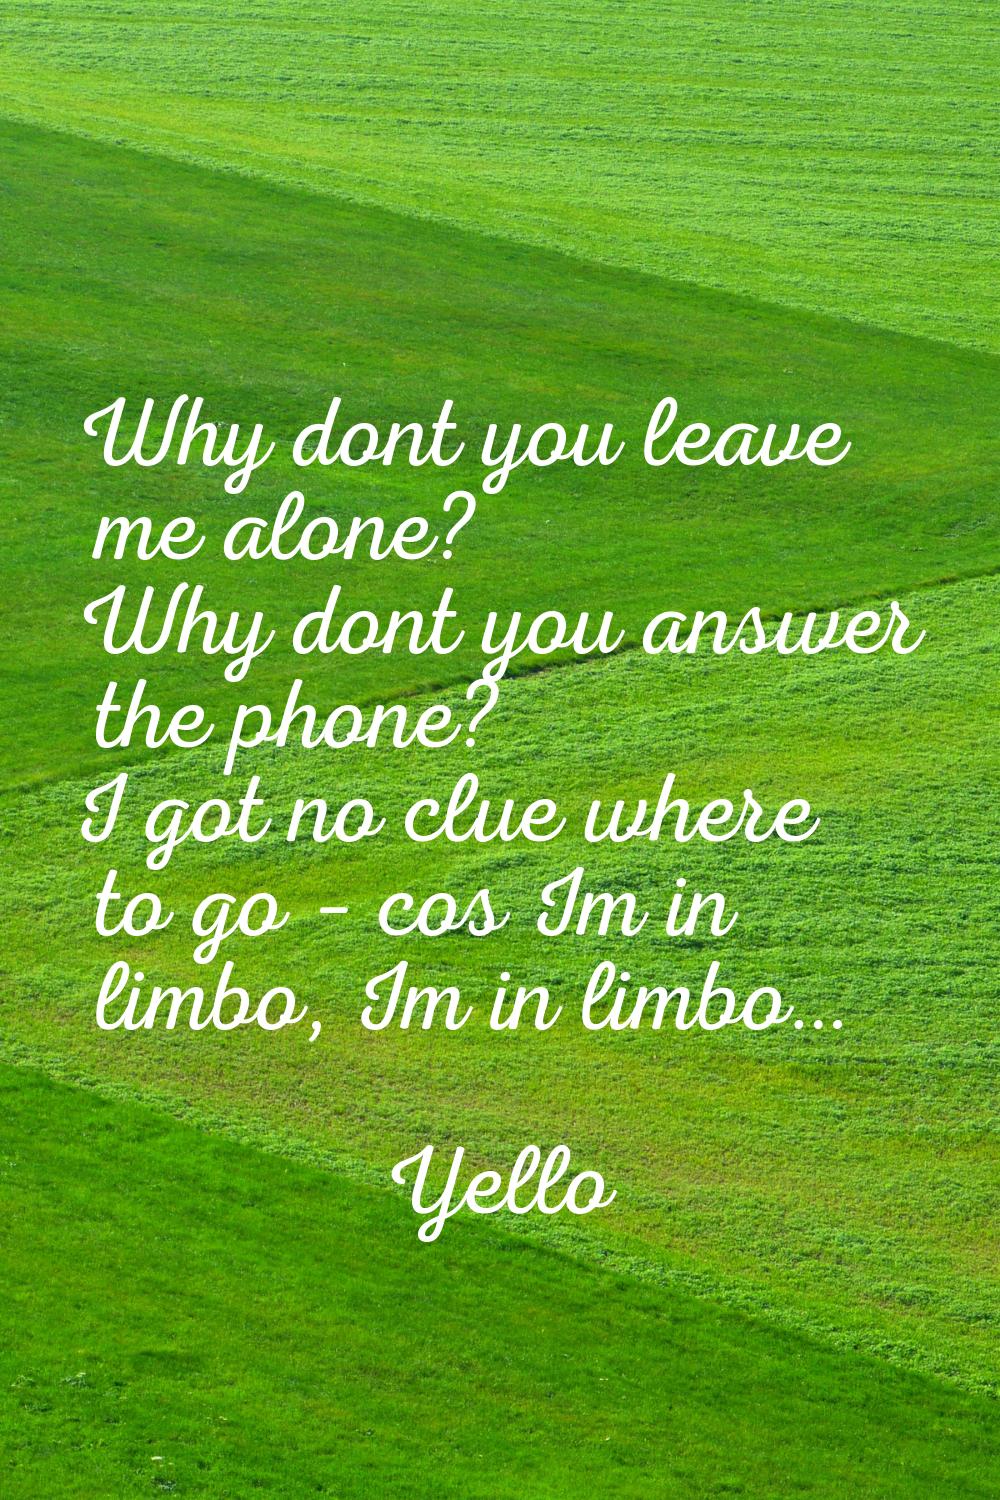 Why dont you leave me alone? Why dont you answer the phone? I got no clue where to go – co